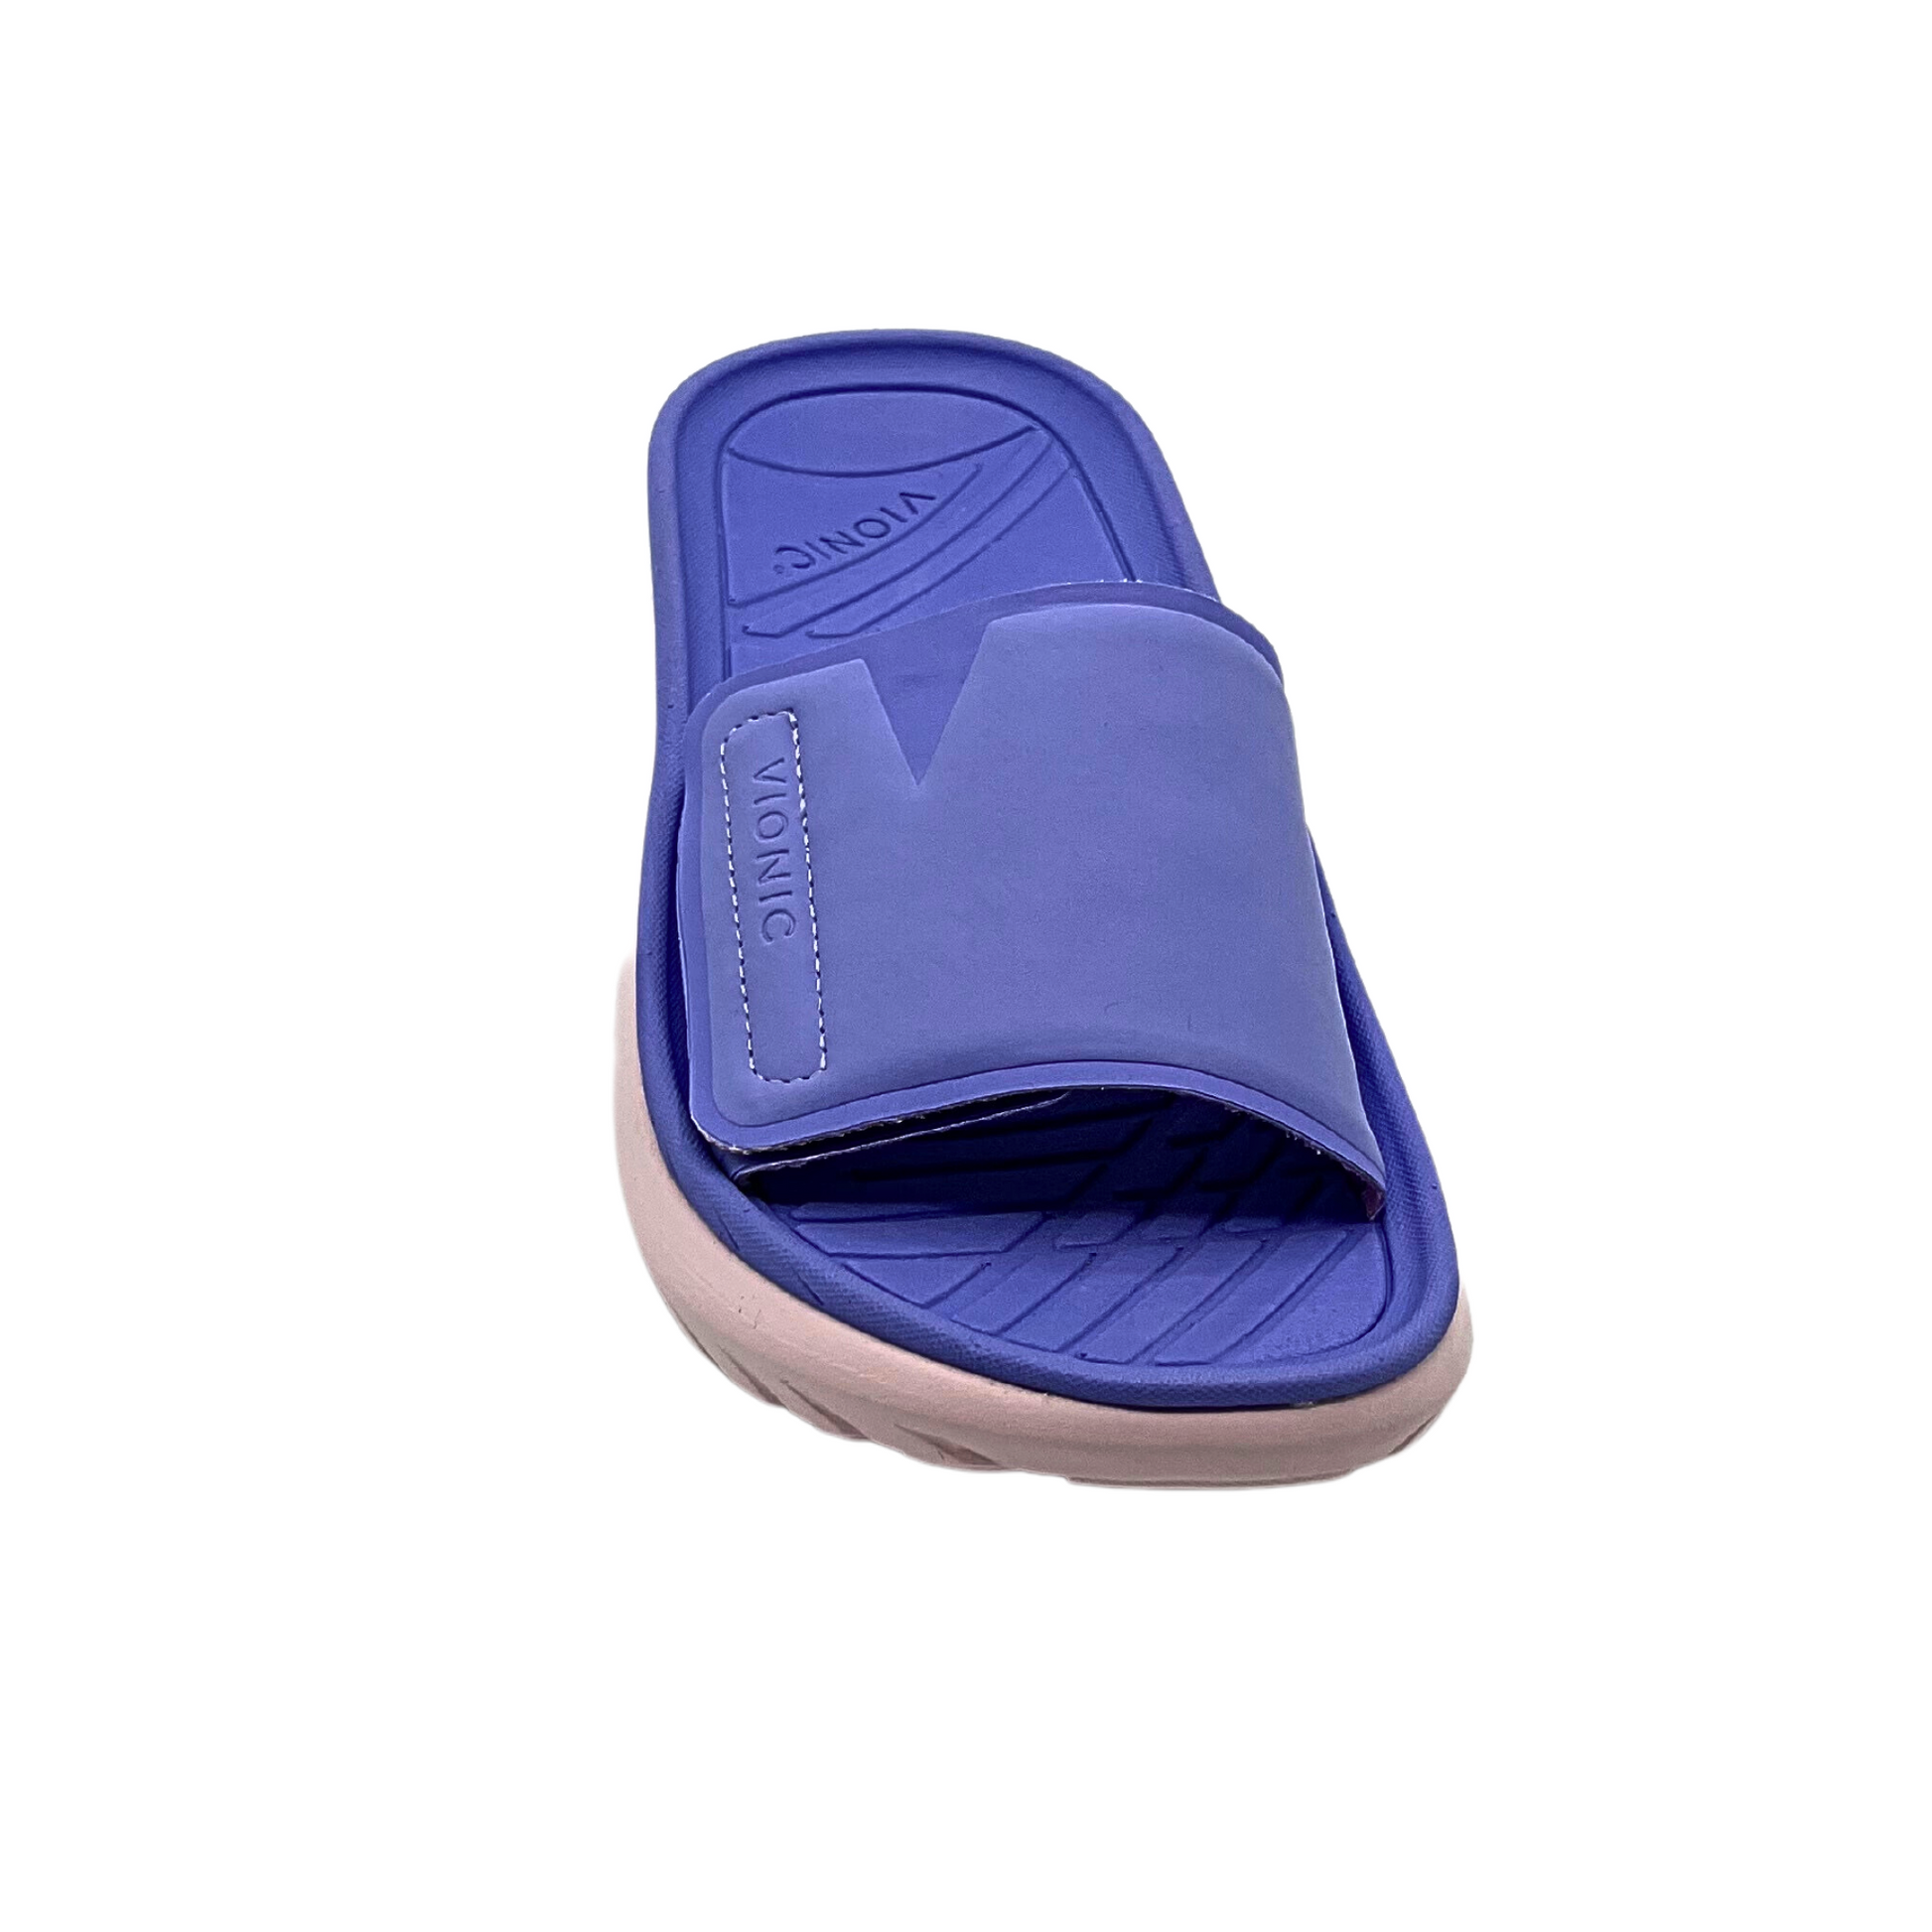 Top down view of a water friendly slide in a fun deep lilac color.  Supportive footbed